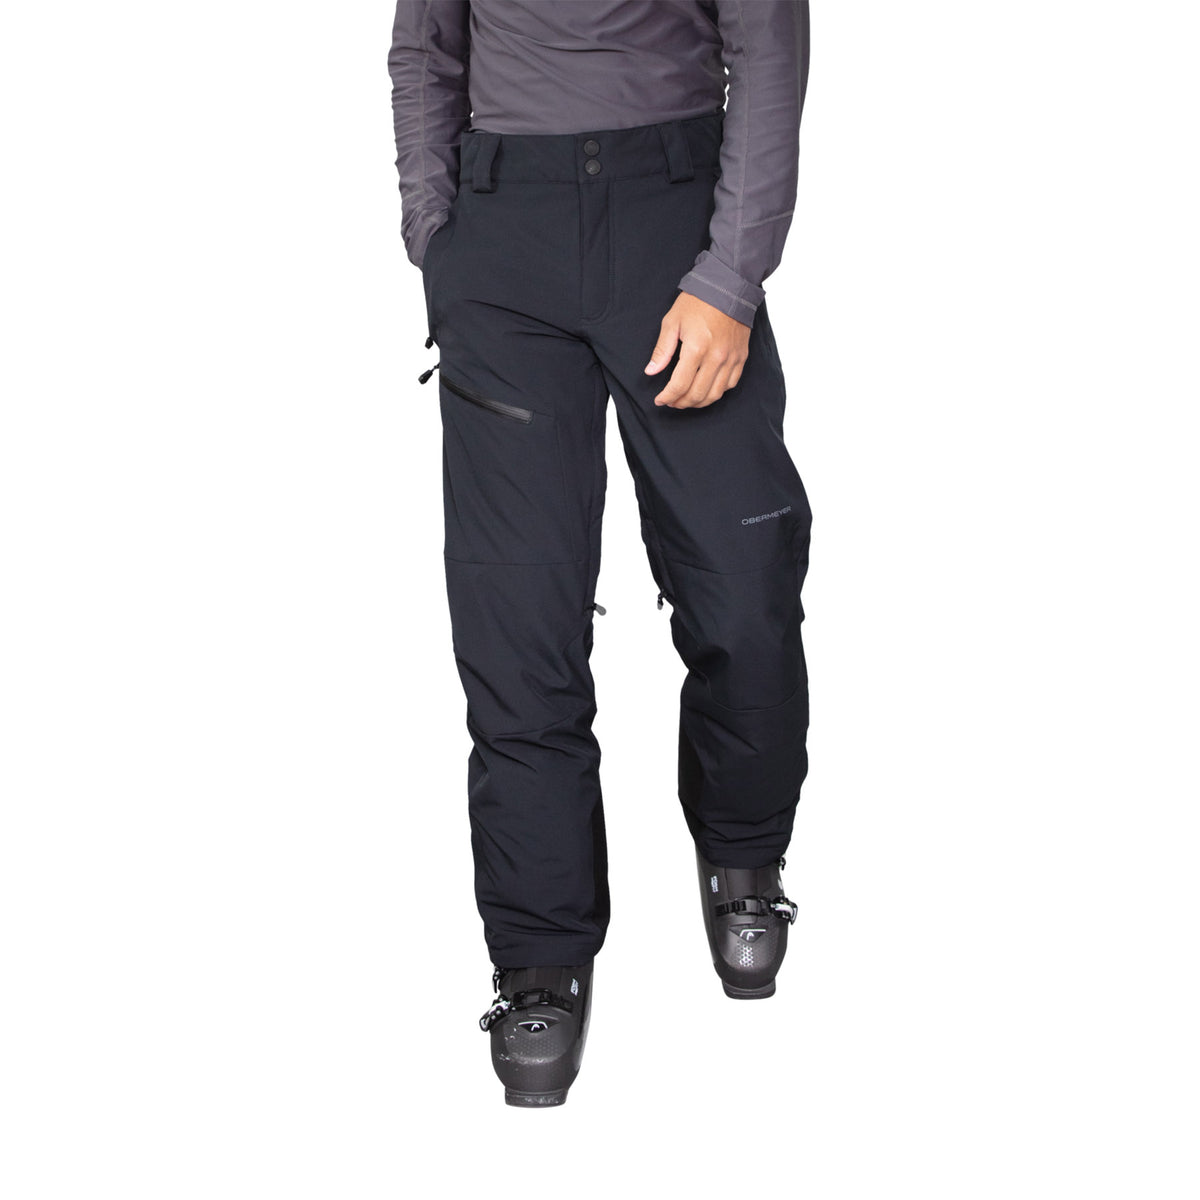 Hero image featuring the Obermeyer Force Pant in black.